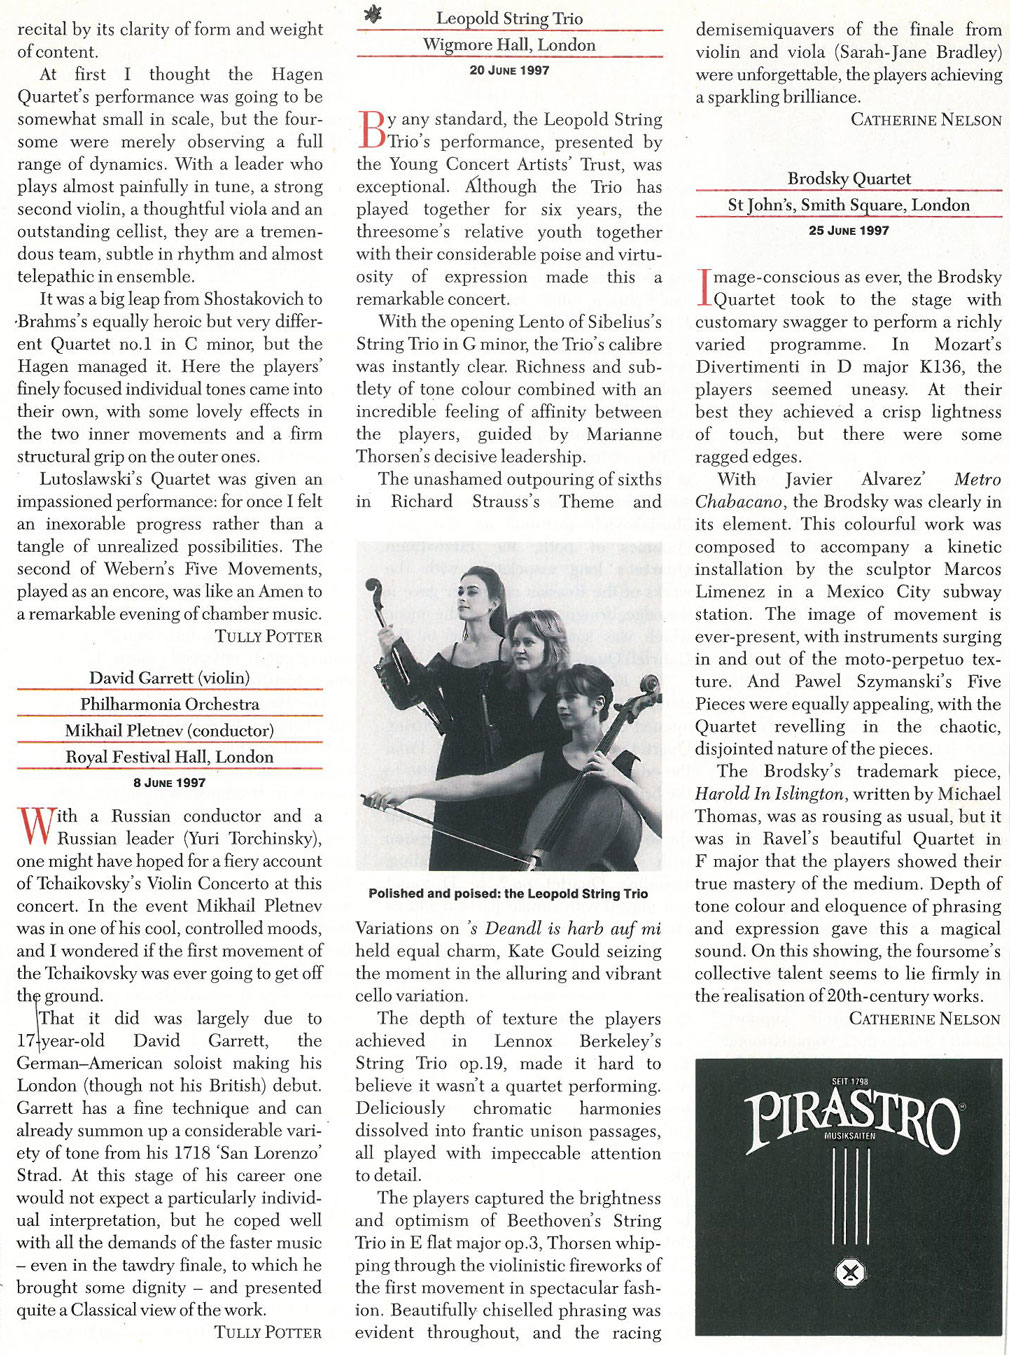 Review, 1997, The Strad